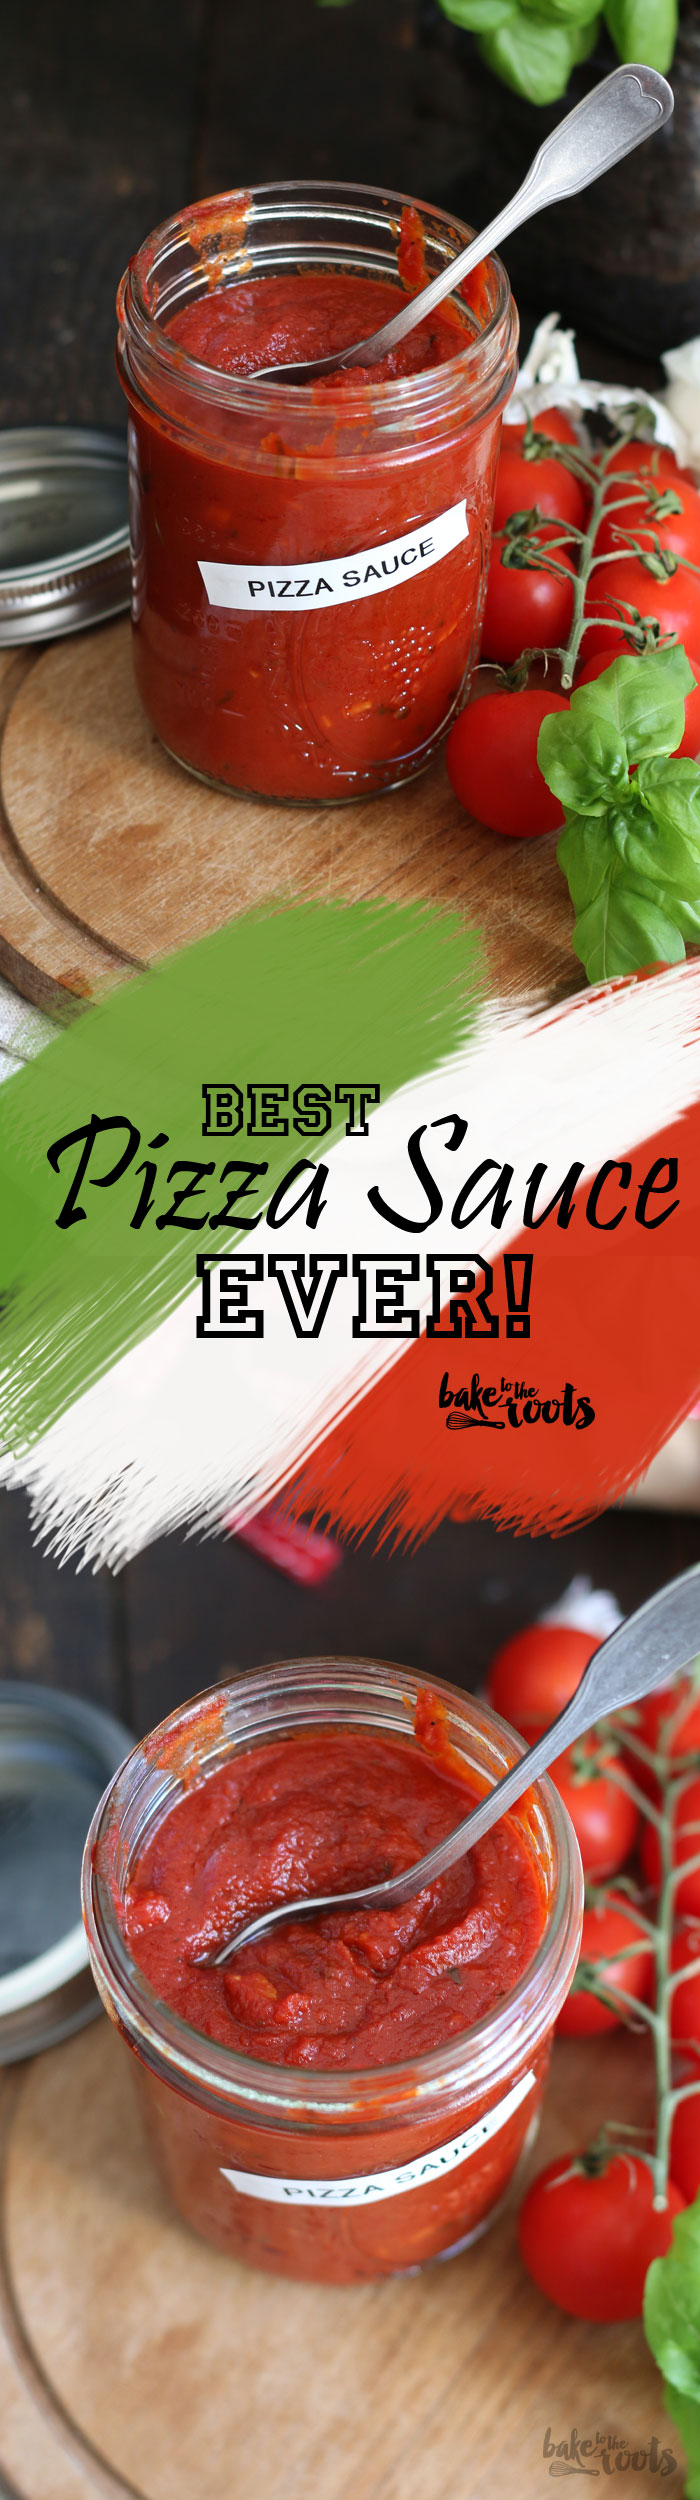 The best Pizza Sauce EVER - You will not use any other anymore | Bake to the roots